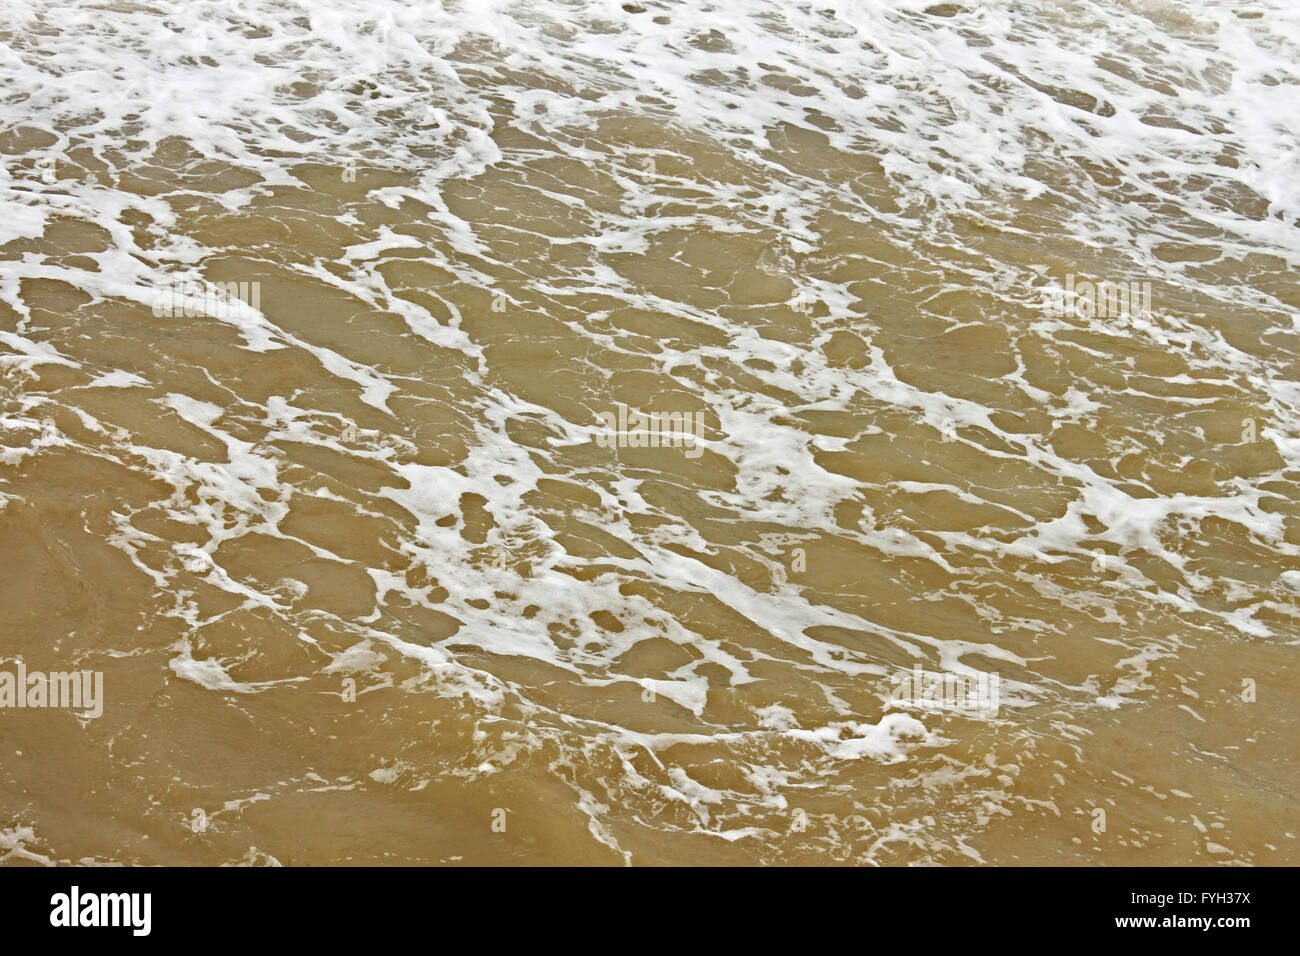 Foamy seawater surface after the storm Stock Photo